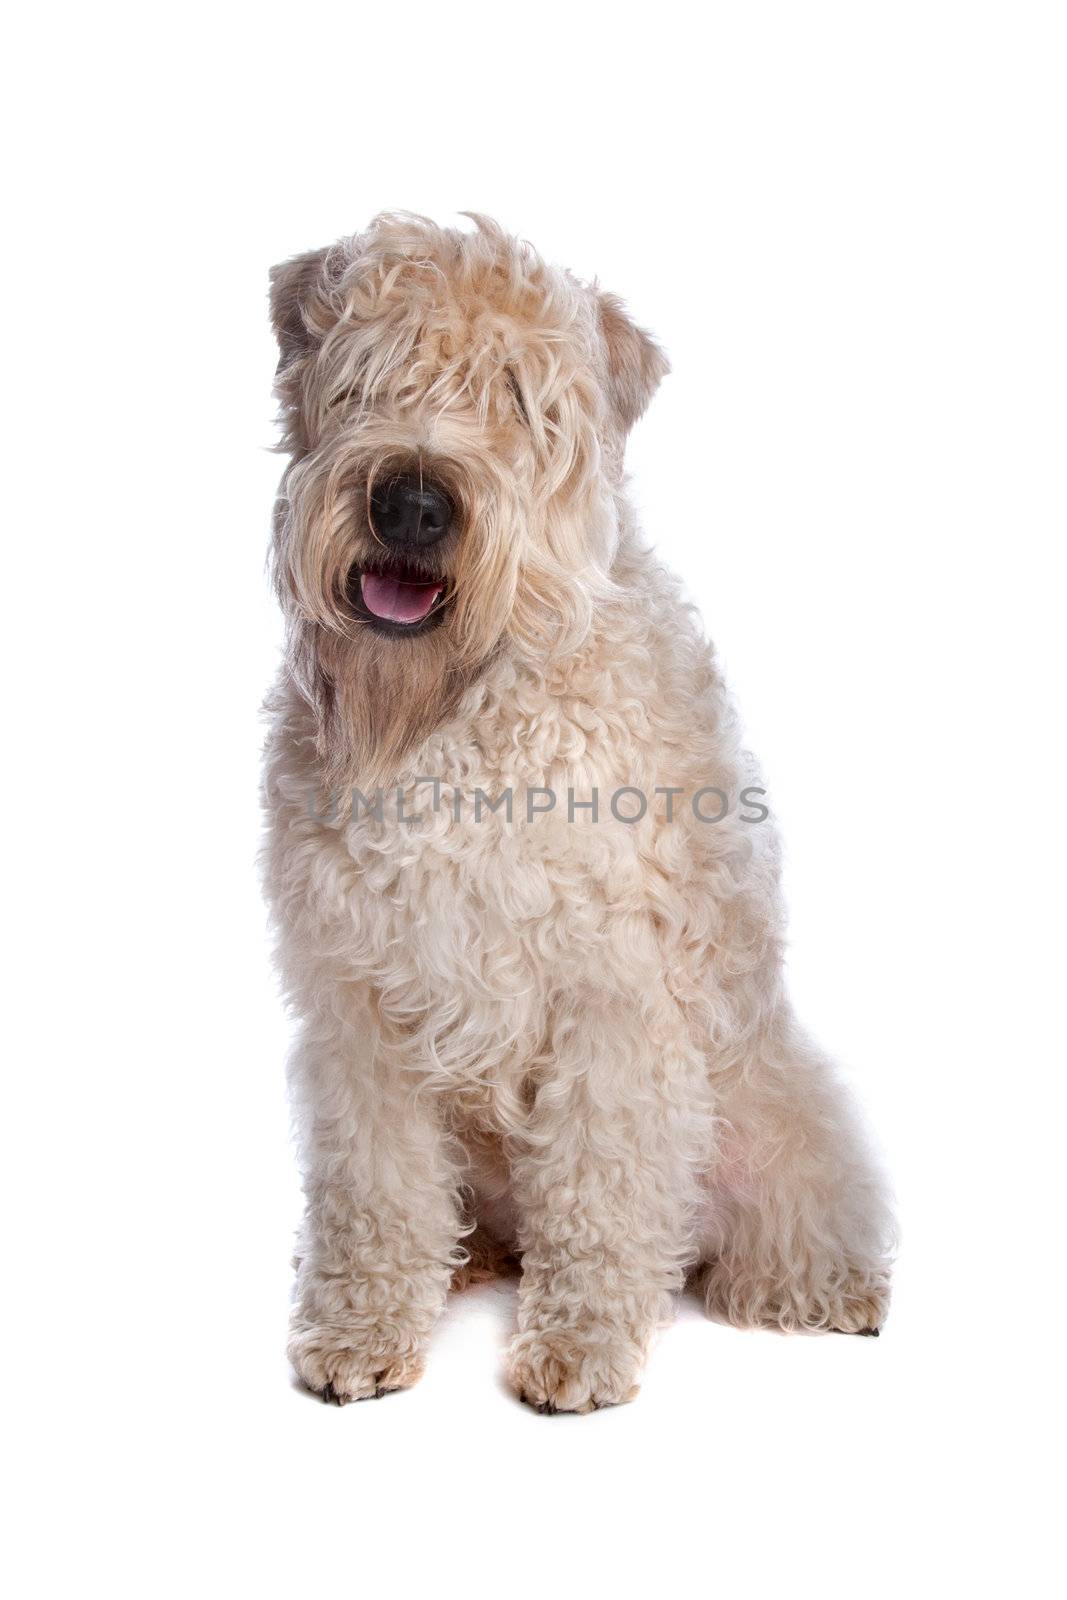 soft coated wheaten terrier dog by eriklam